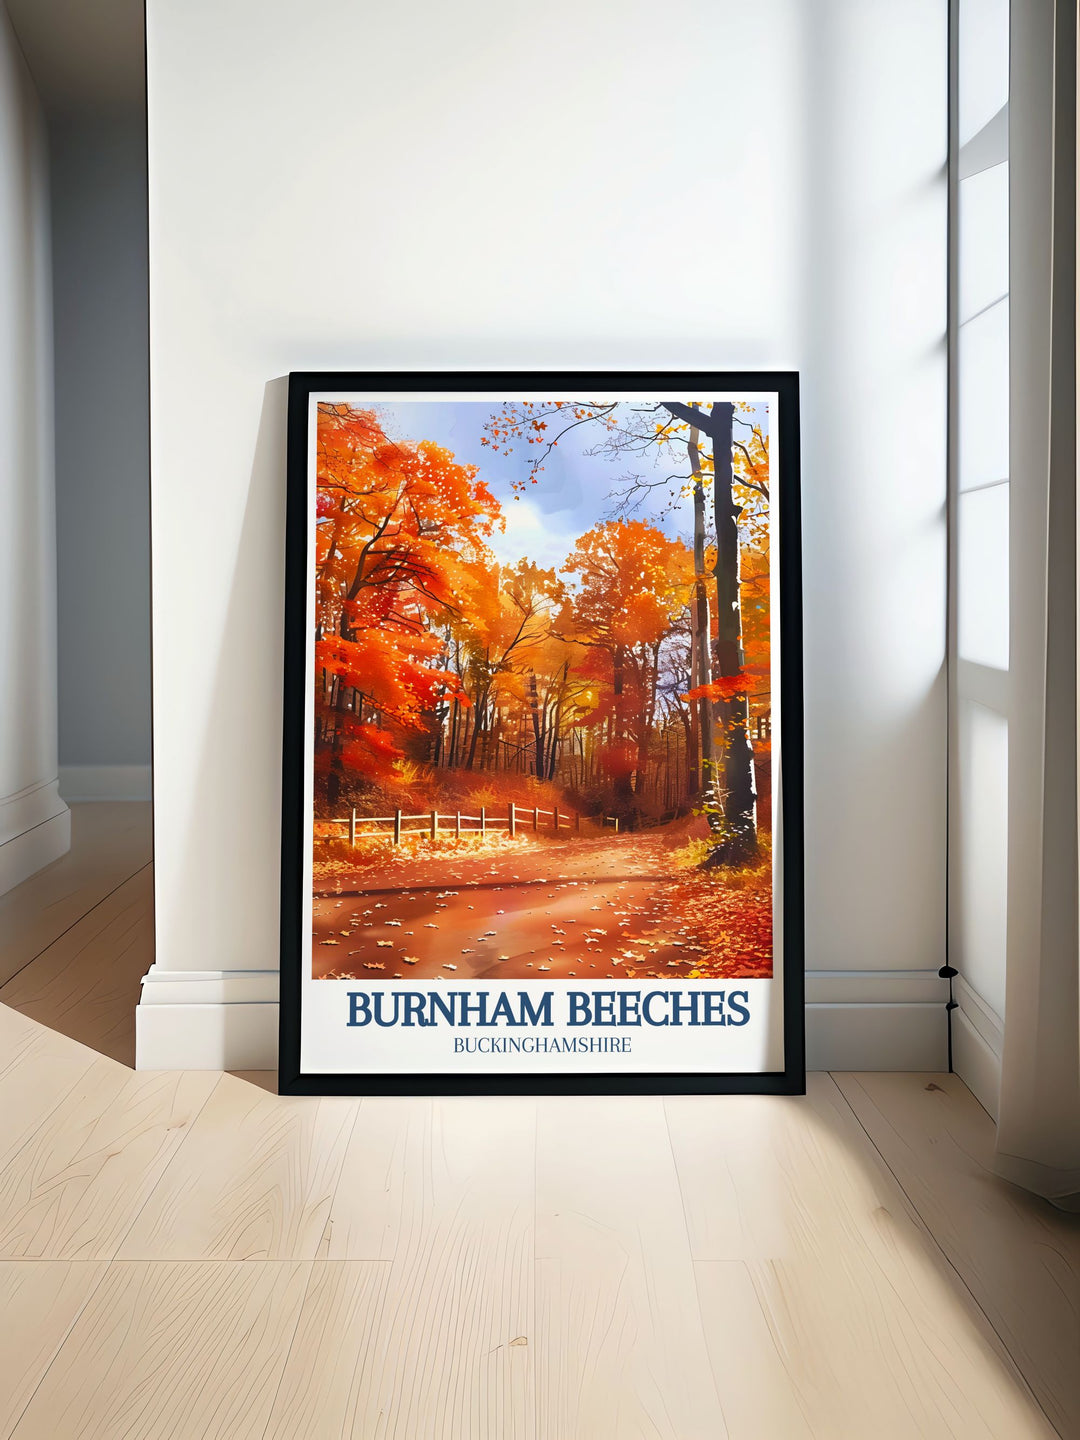 The picturesque scenery of Burnham Beeches and the historic allure of Hartley Court Moat are featured in this vibrant travel poster, perfect for adding the UKs unique charm and heritage to your home.